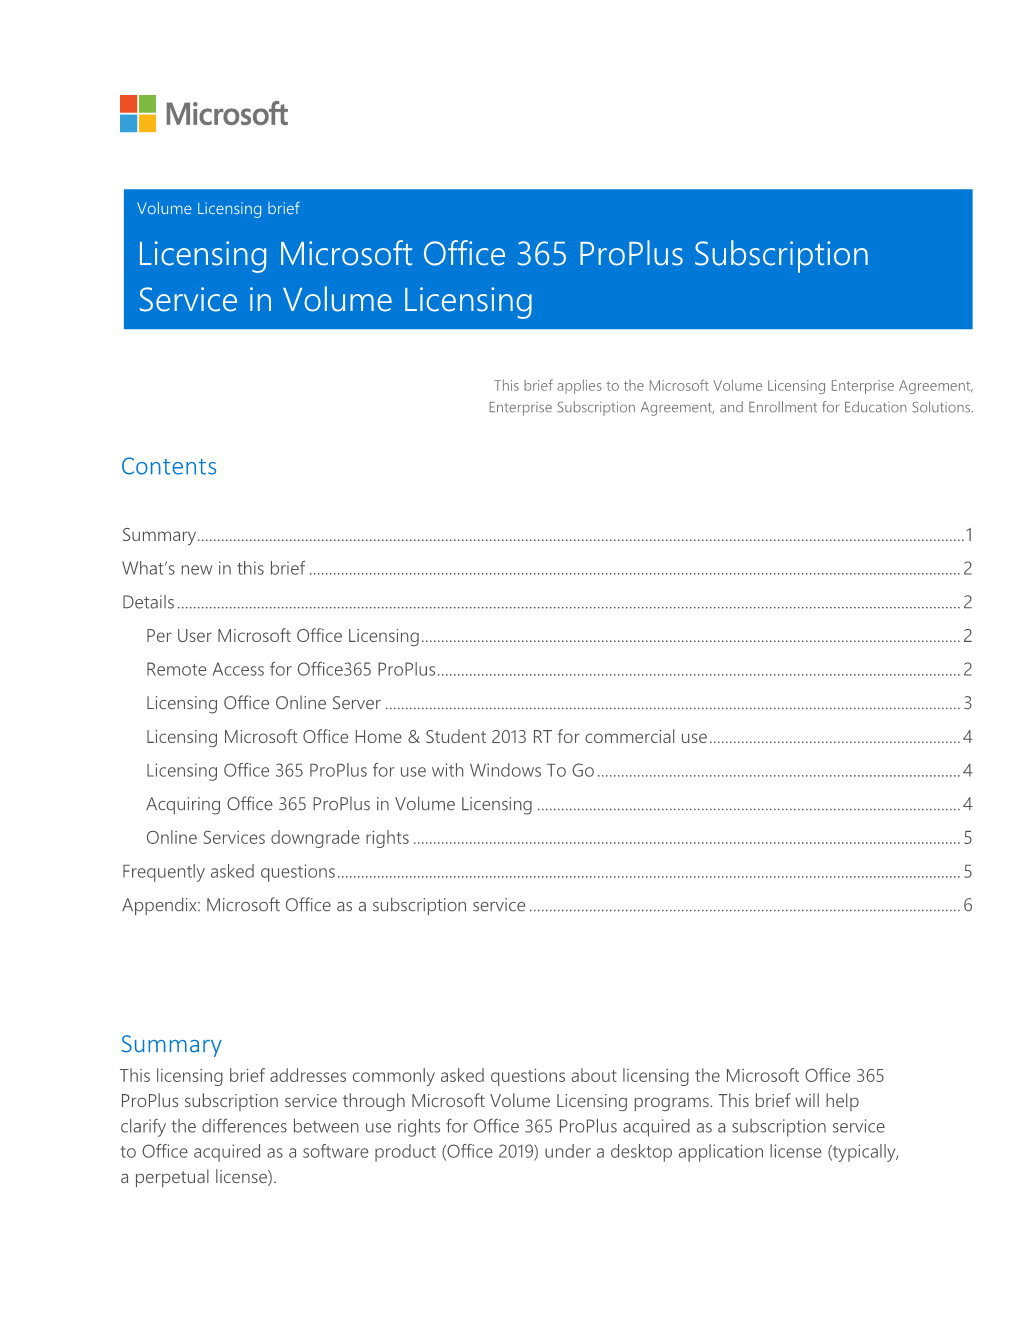 Licensing Microsoft Office 365 Proplus Subscription Service in Volume Licensing